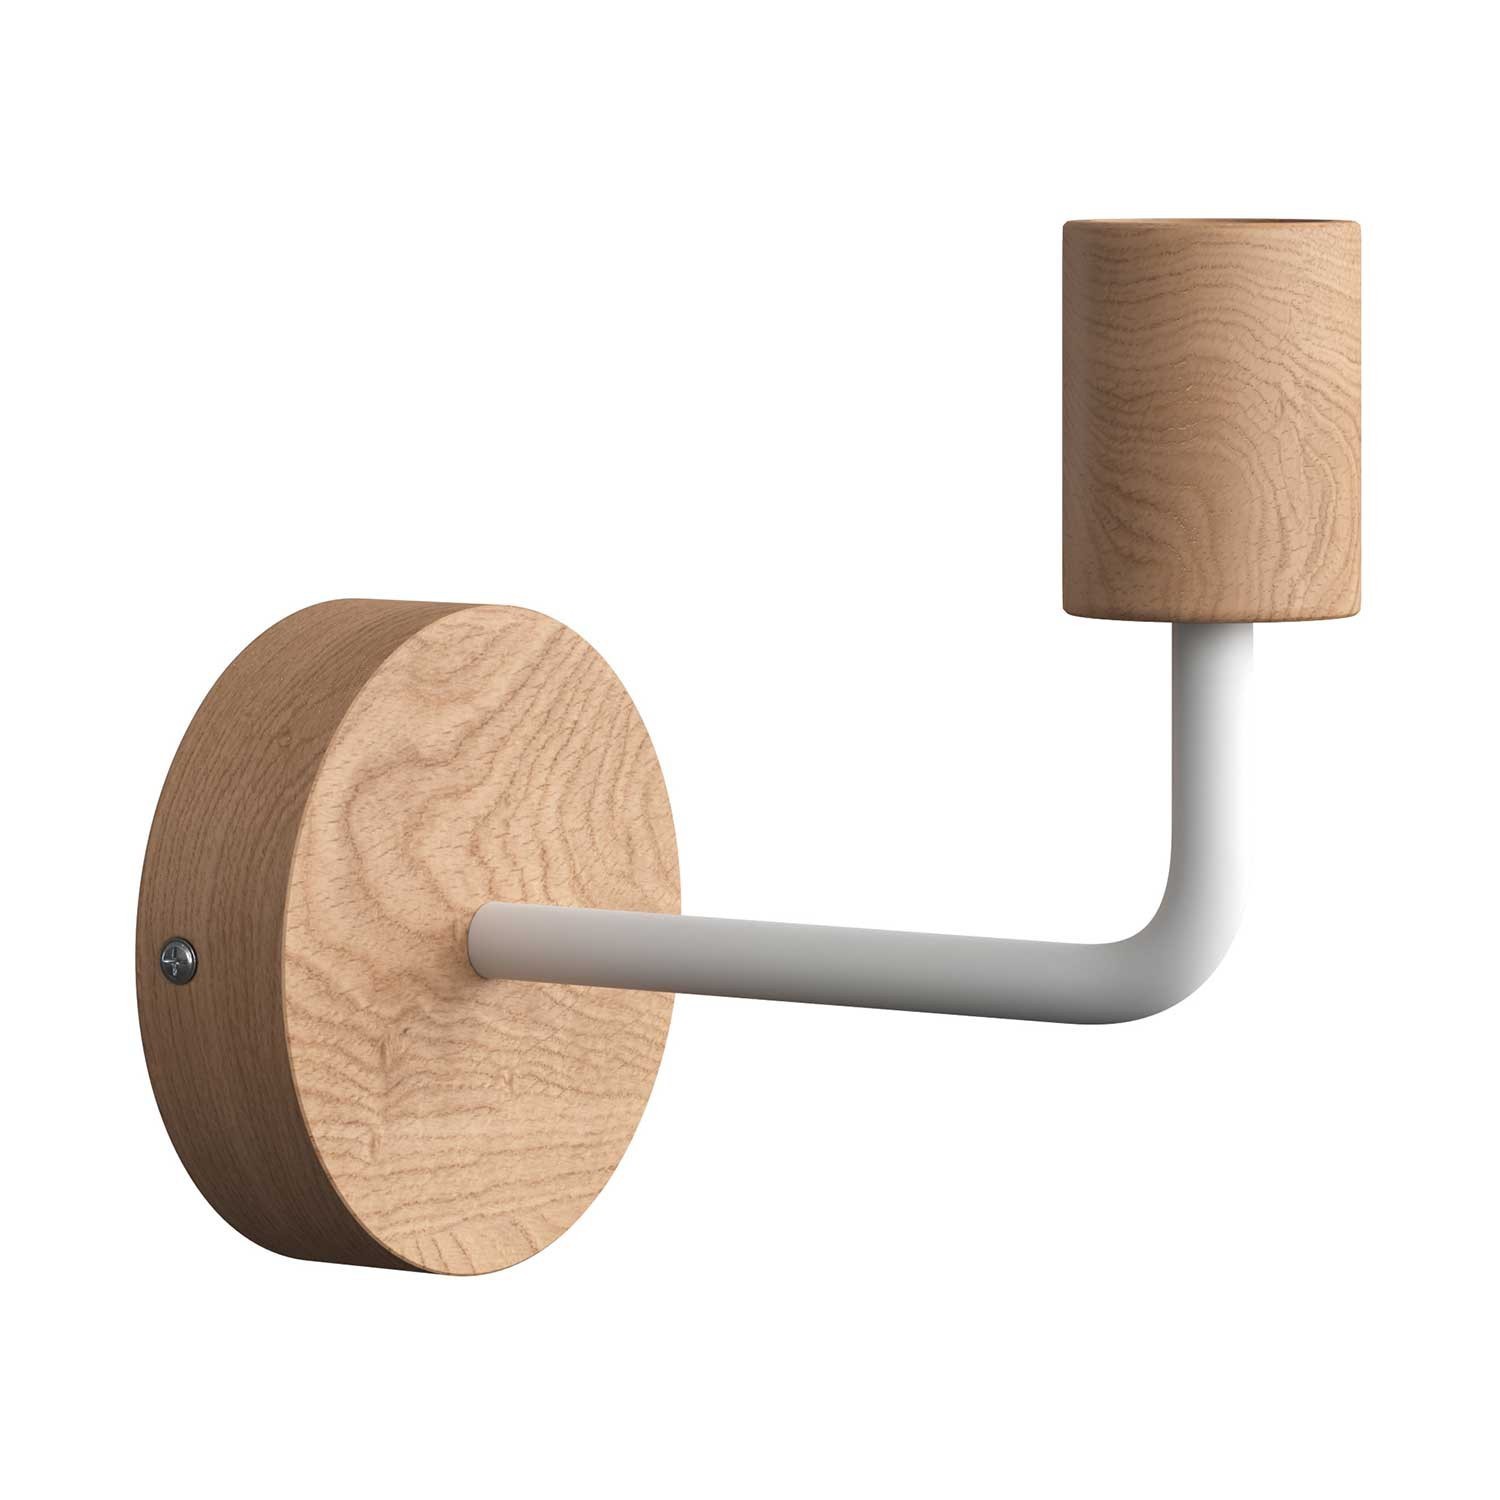 Fermaluce Wood, wooden wall light with bent extension